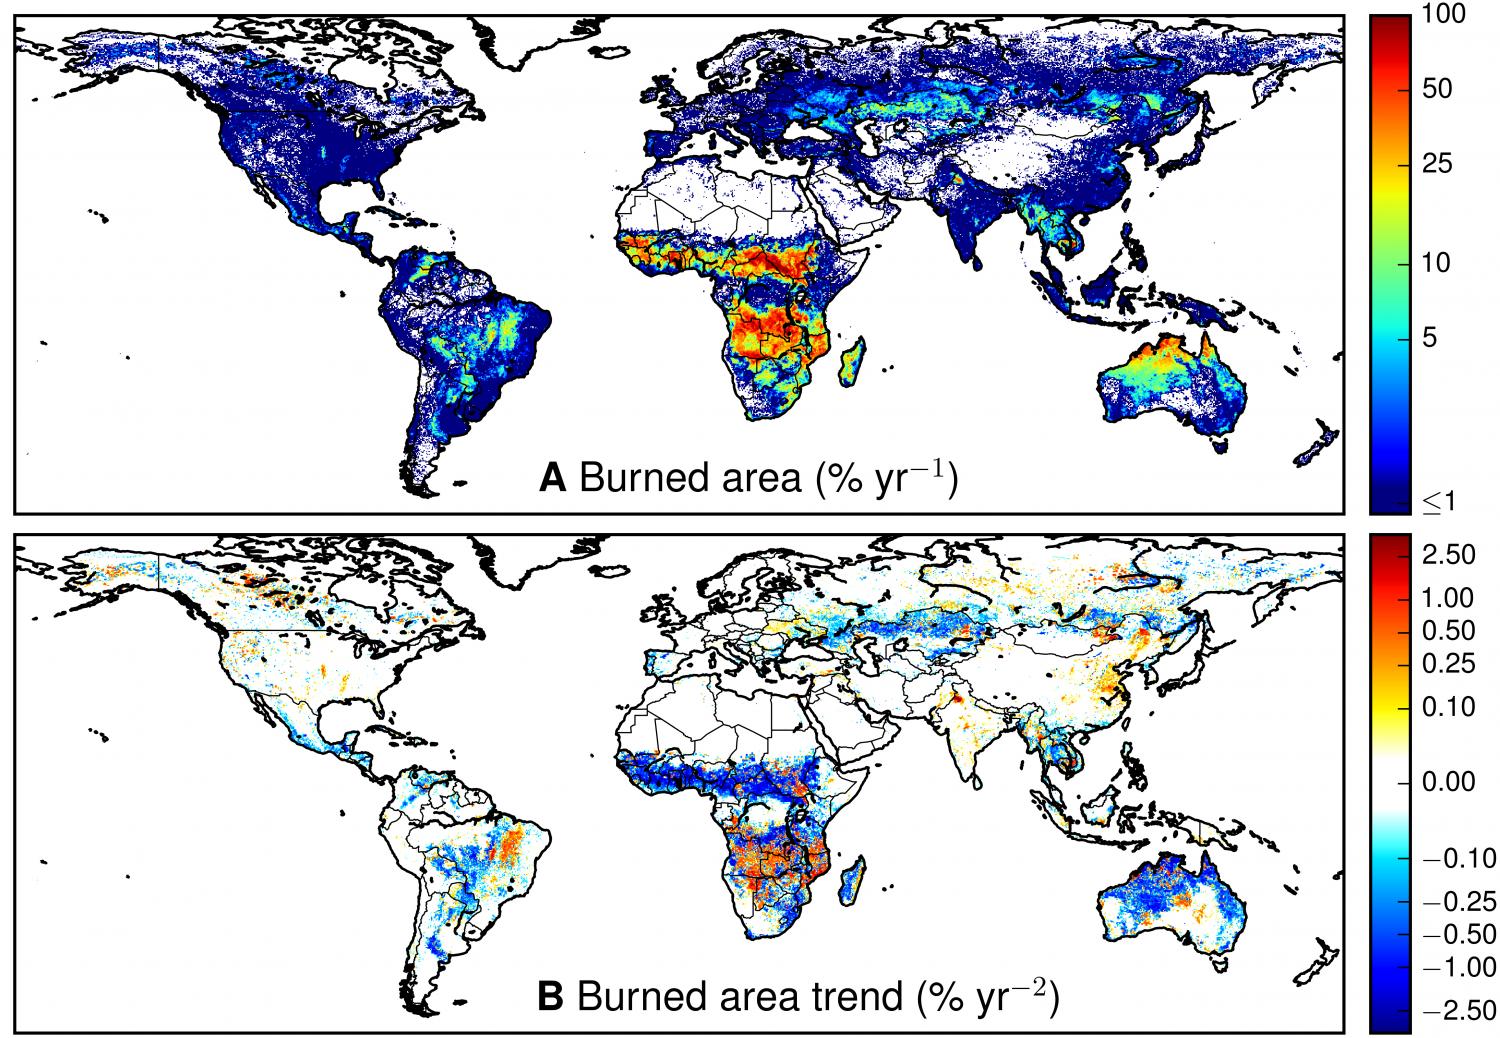 Tree-bark thickness indicates fire-resistance in a hotter future